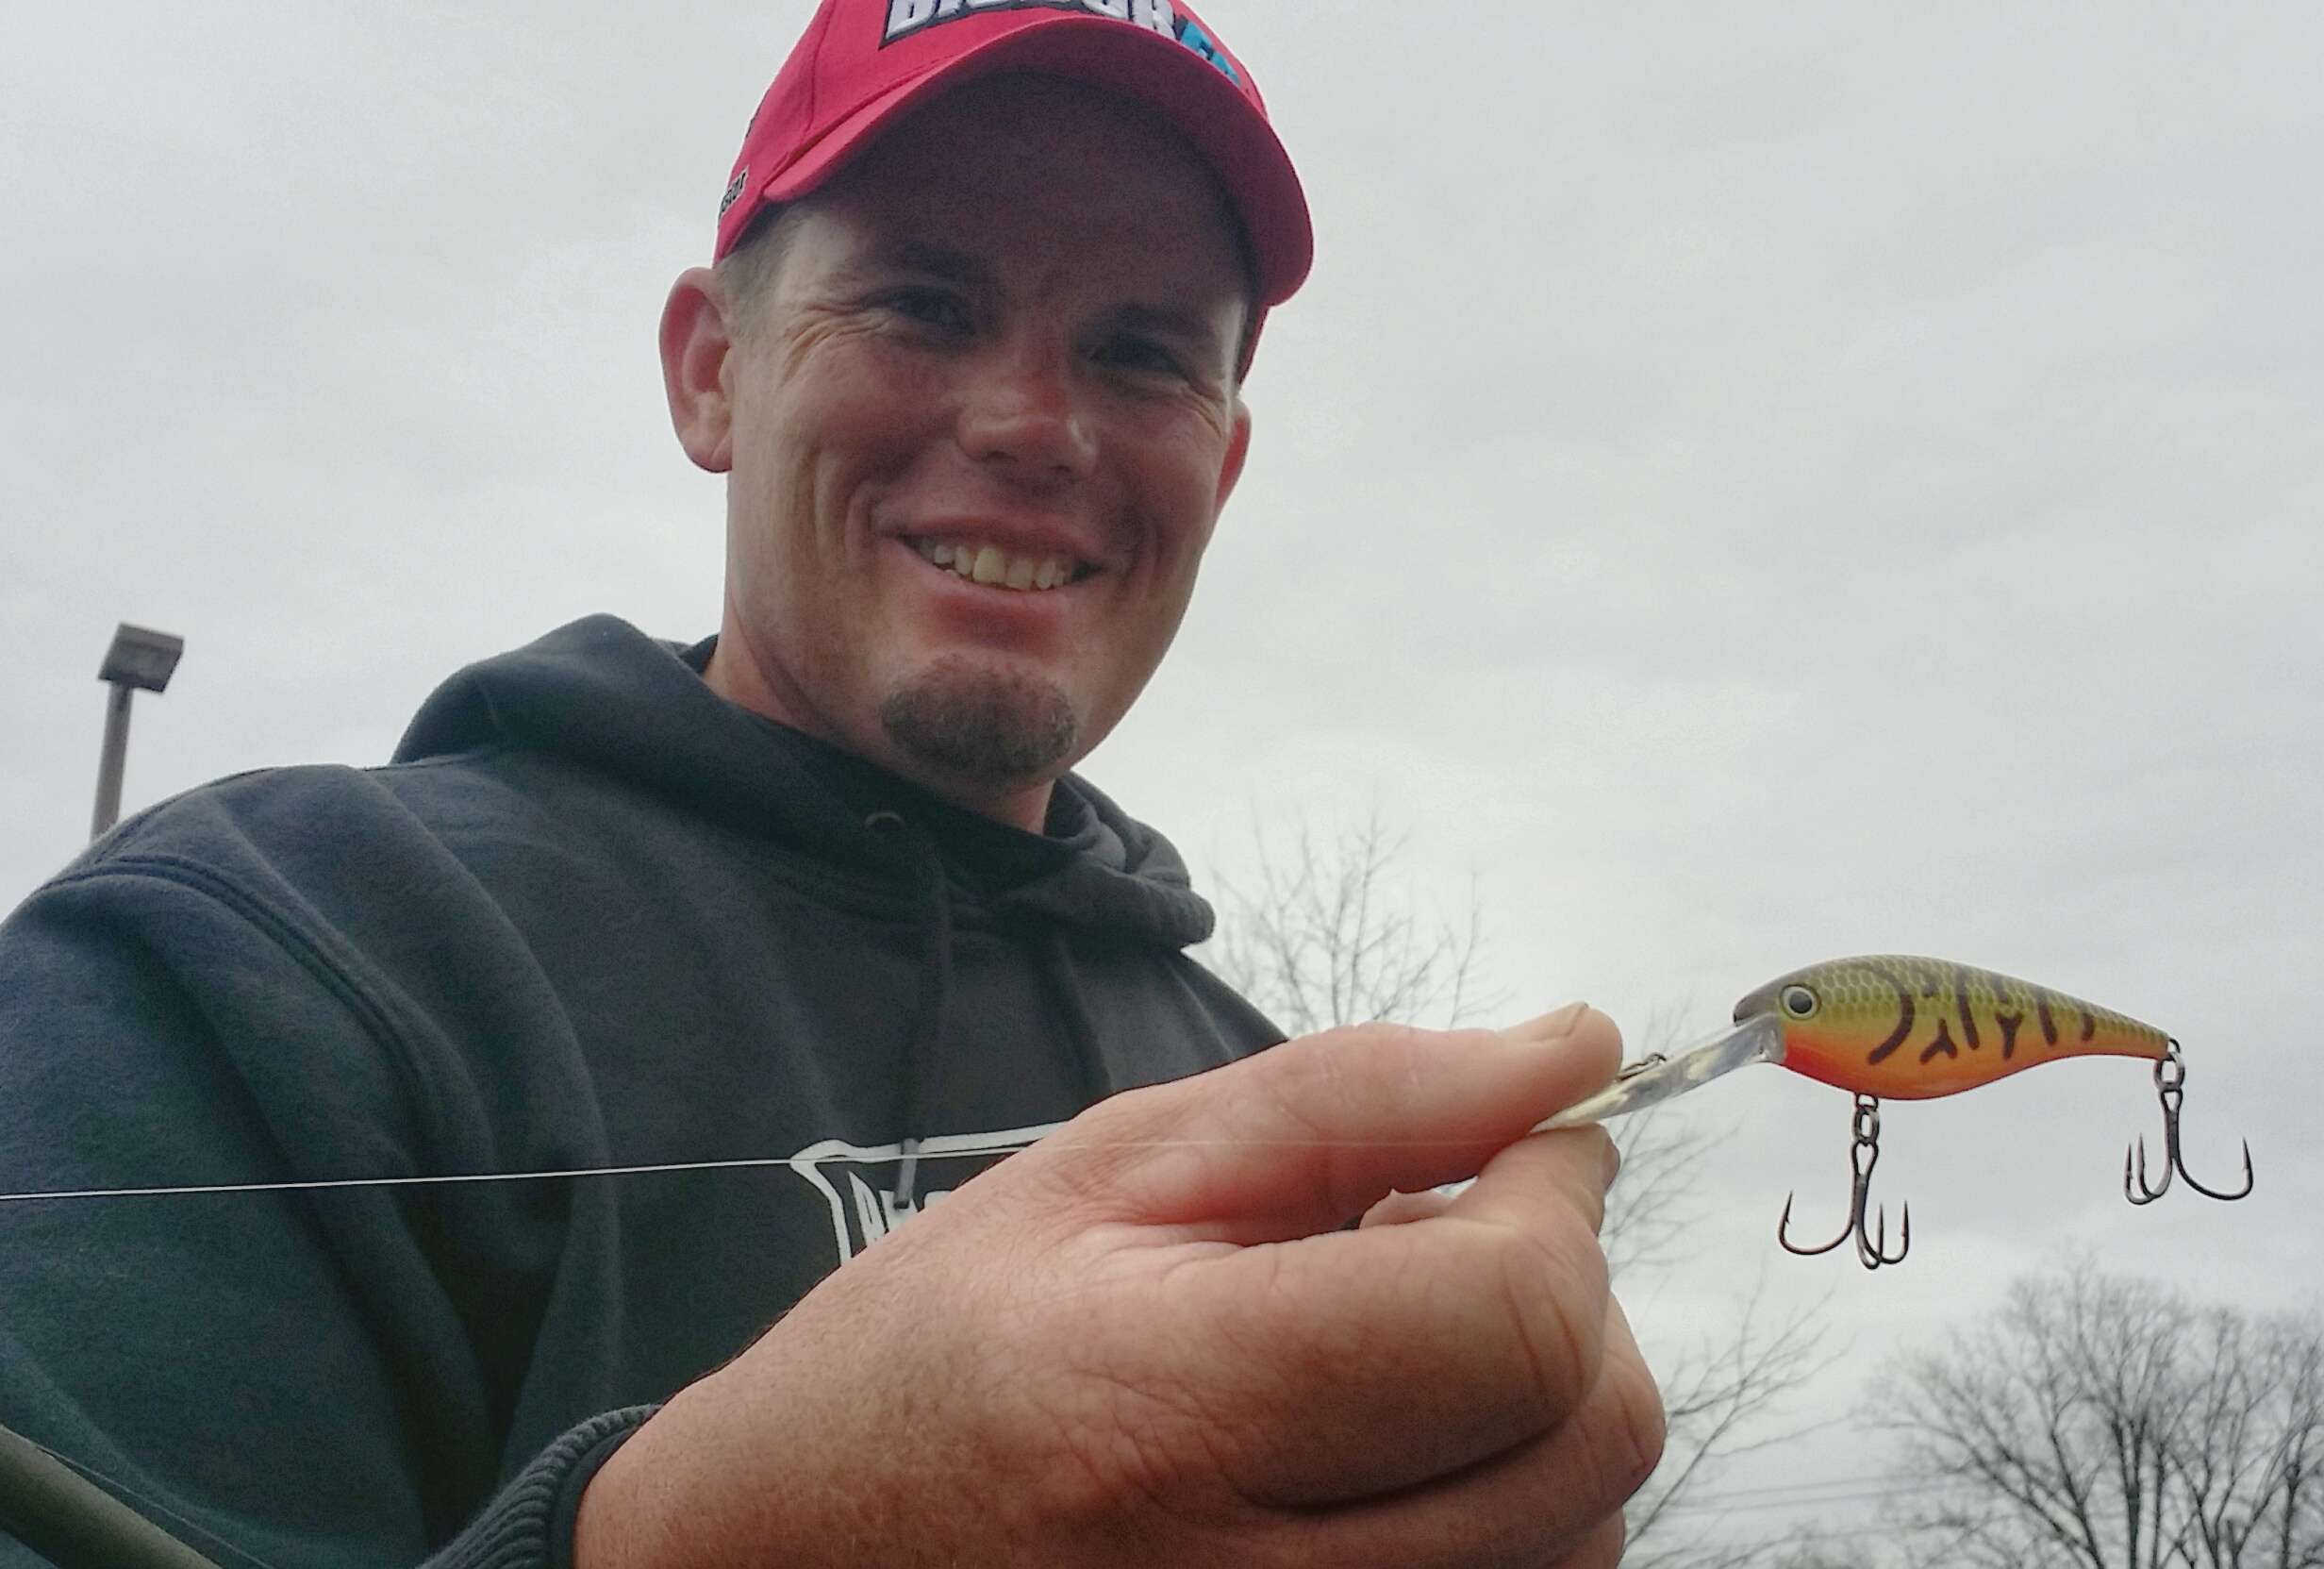 Keith Combs keyed on bridge riprap, channel-swing banks, and steep banks with rock and stumps. He fished a Strike King Pro Model Lucky Shad (crawdad), and reeled it very slowly, 